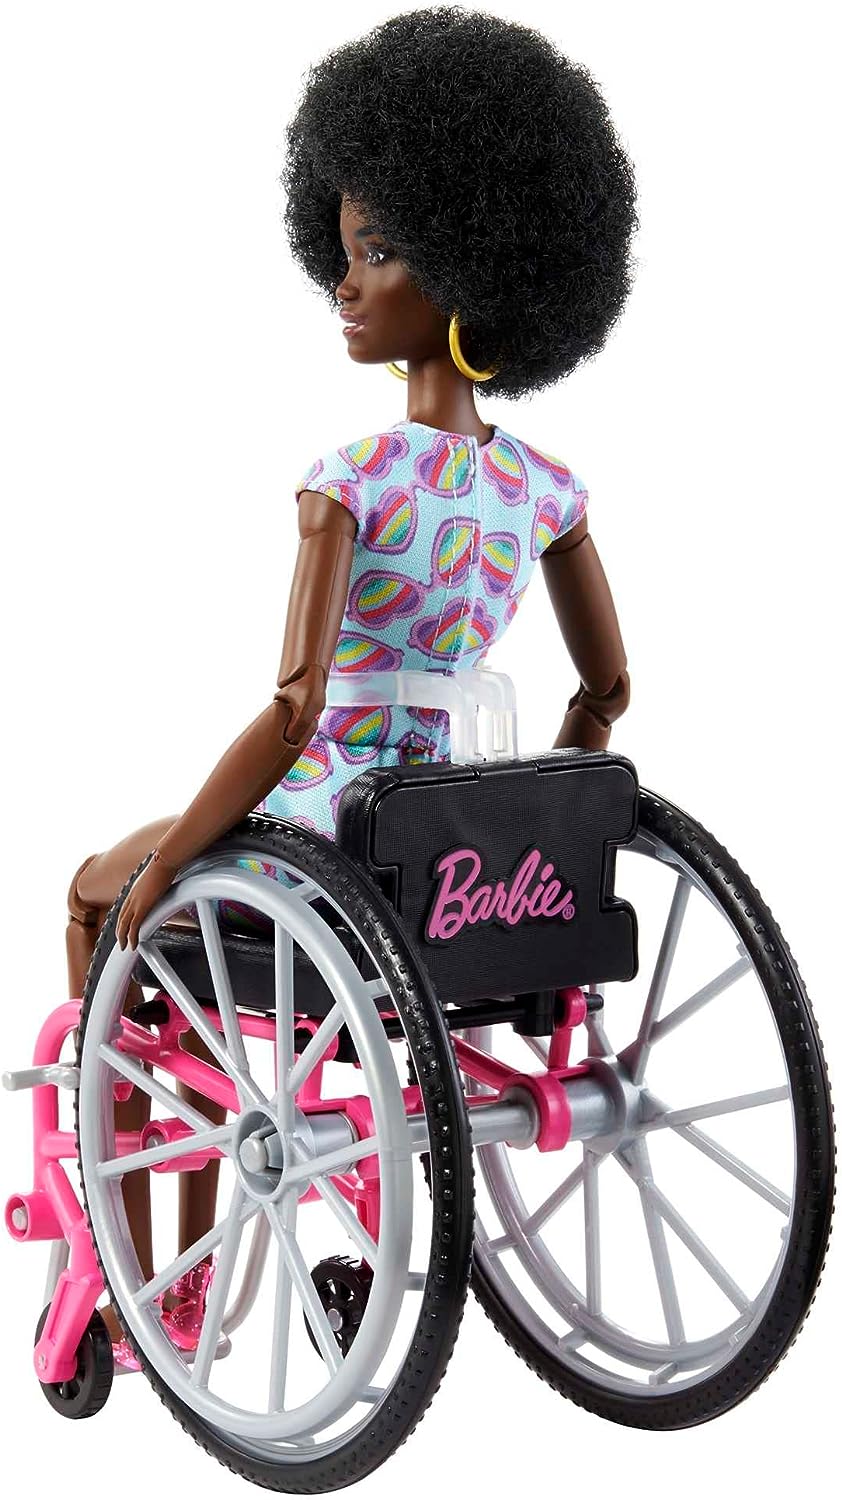 ?Barbie Doll with Wheelchair and Ramp, Kids Toys, Barbie Fashionistas, Curly Black Hair